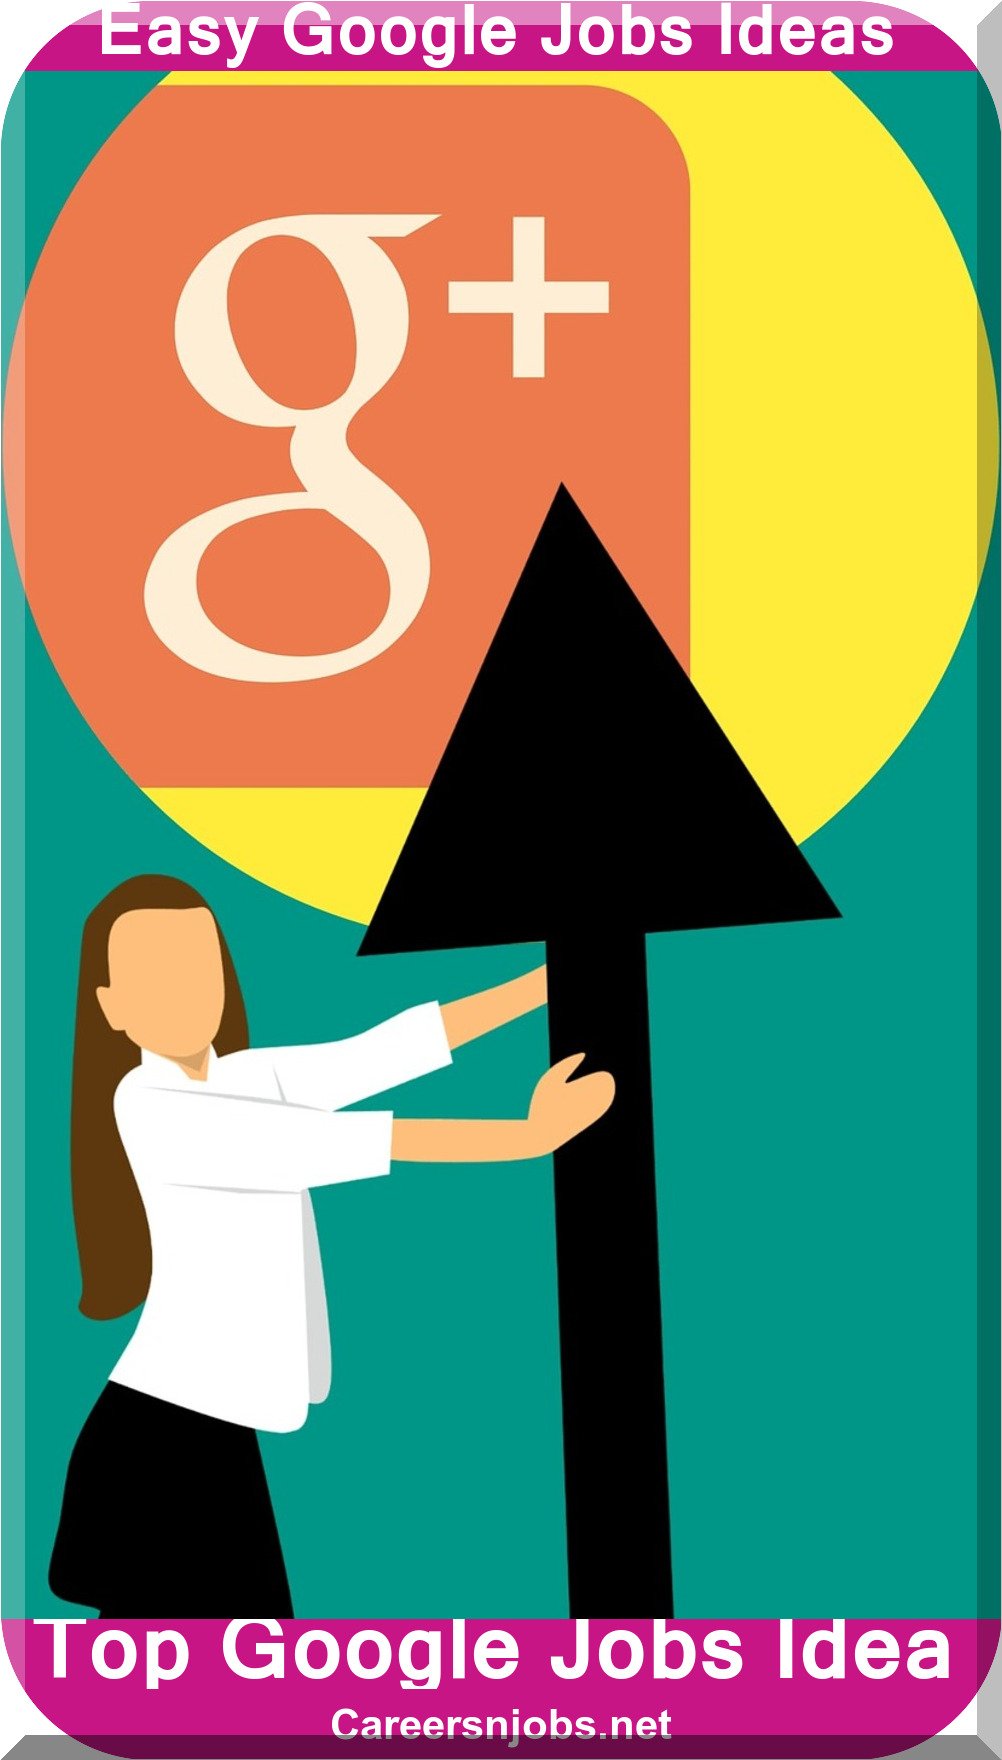 What Kind of Heathcare Jobs Are Available in Google?